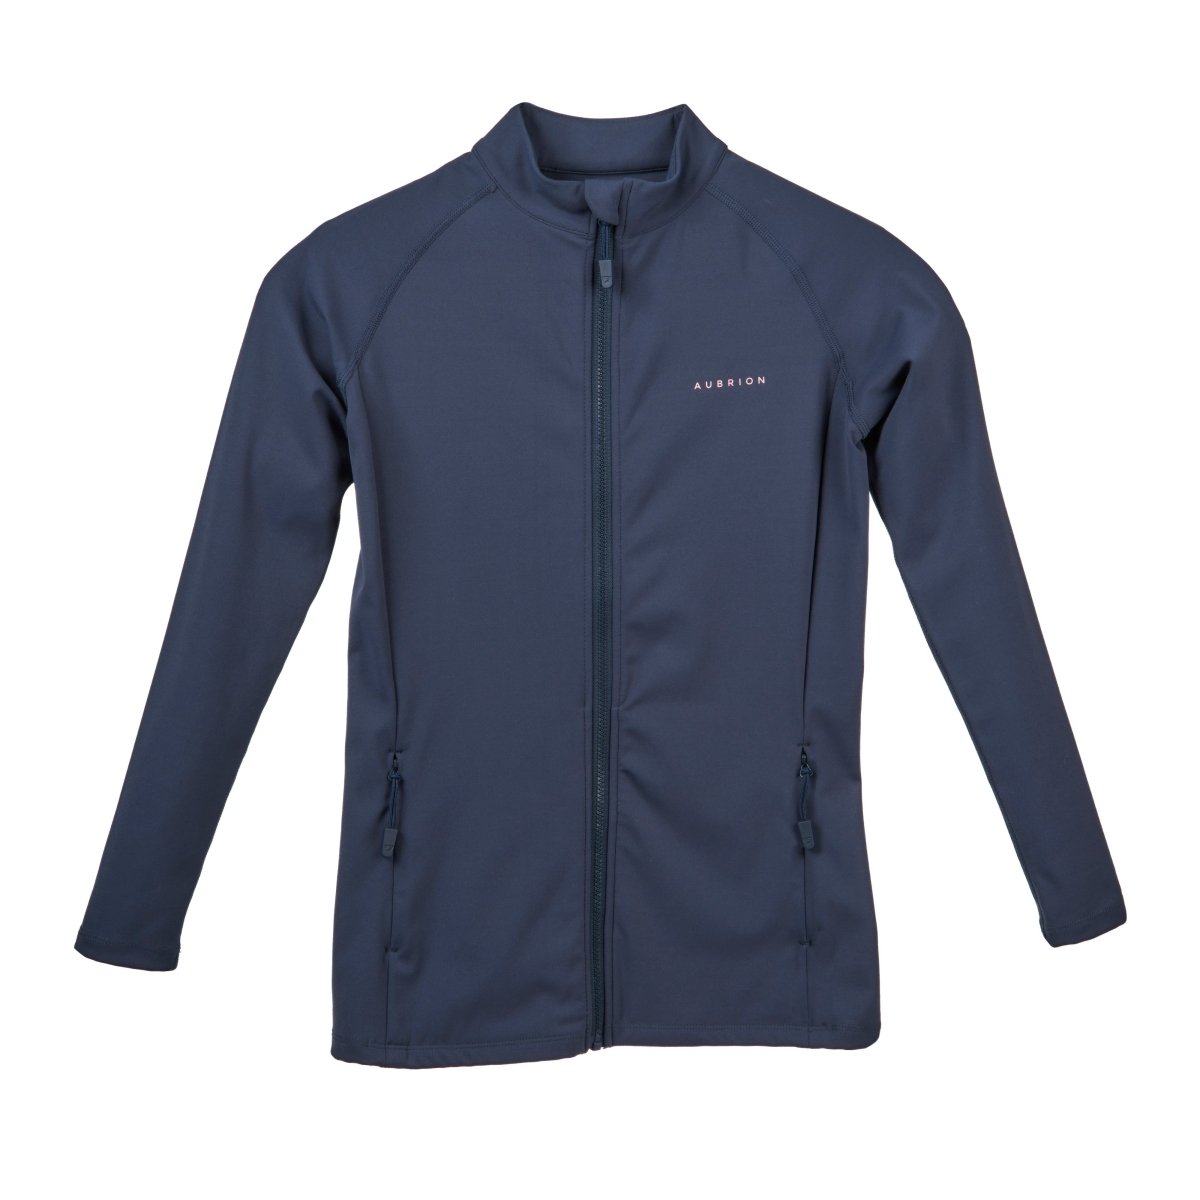 Aubrion Non-Stop Jacket - Young Rider - Navy - 11/12 Yrs